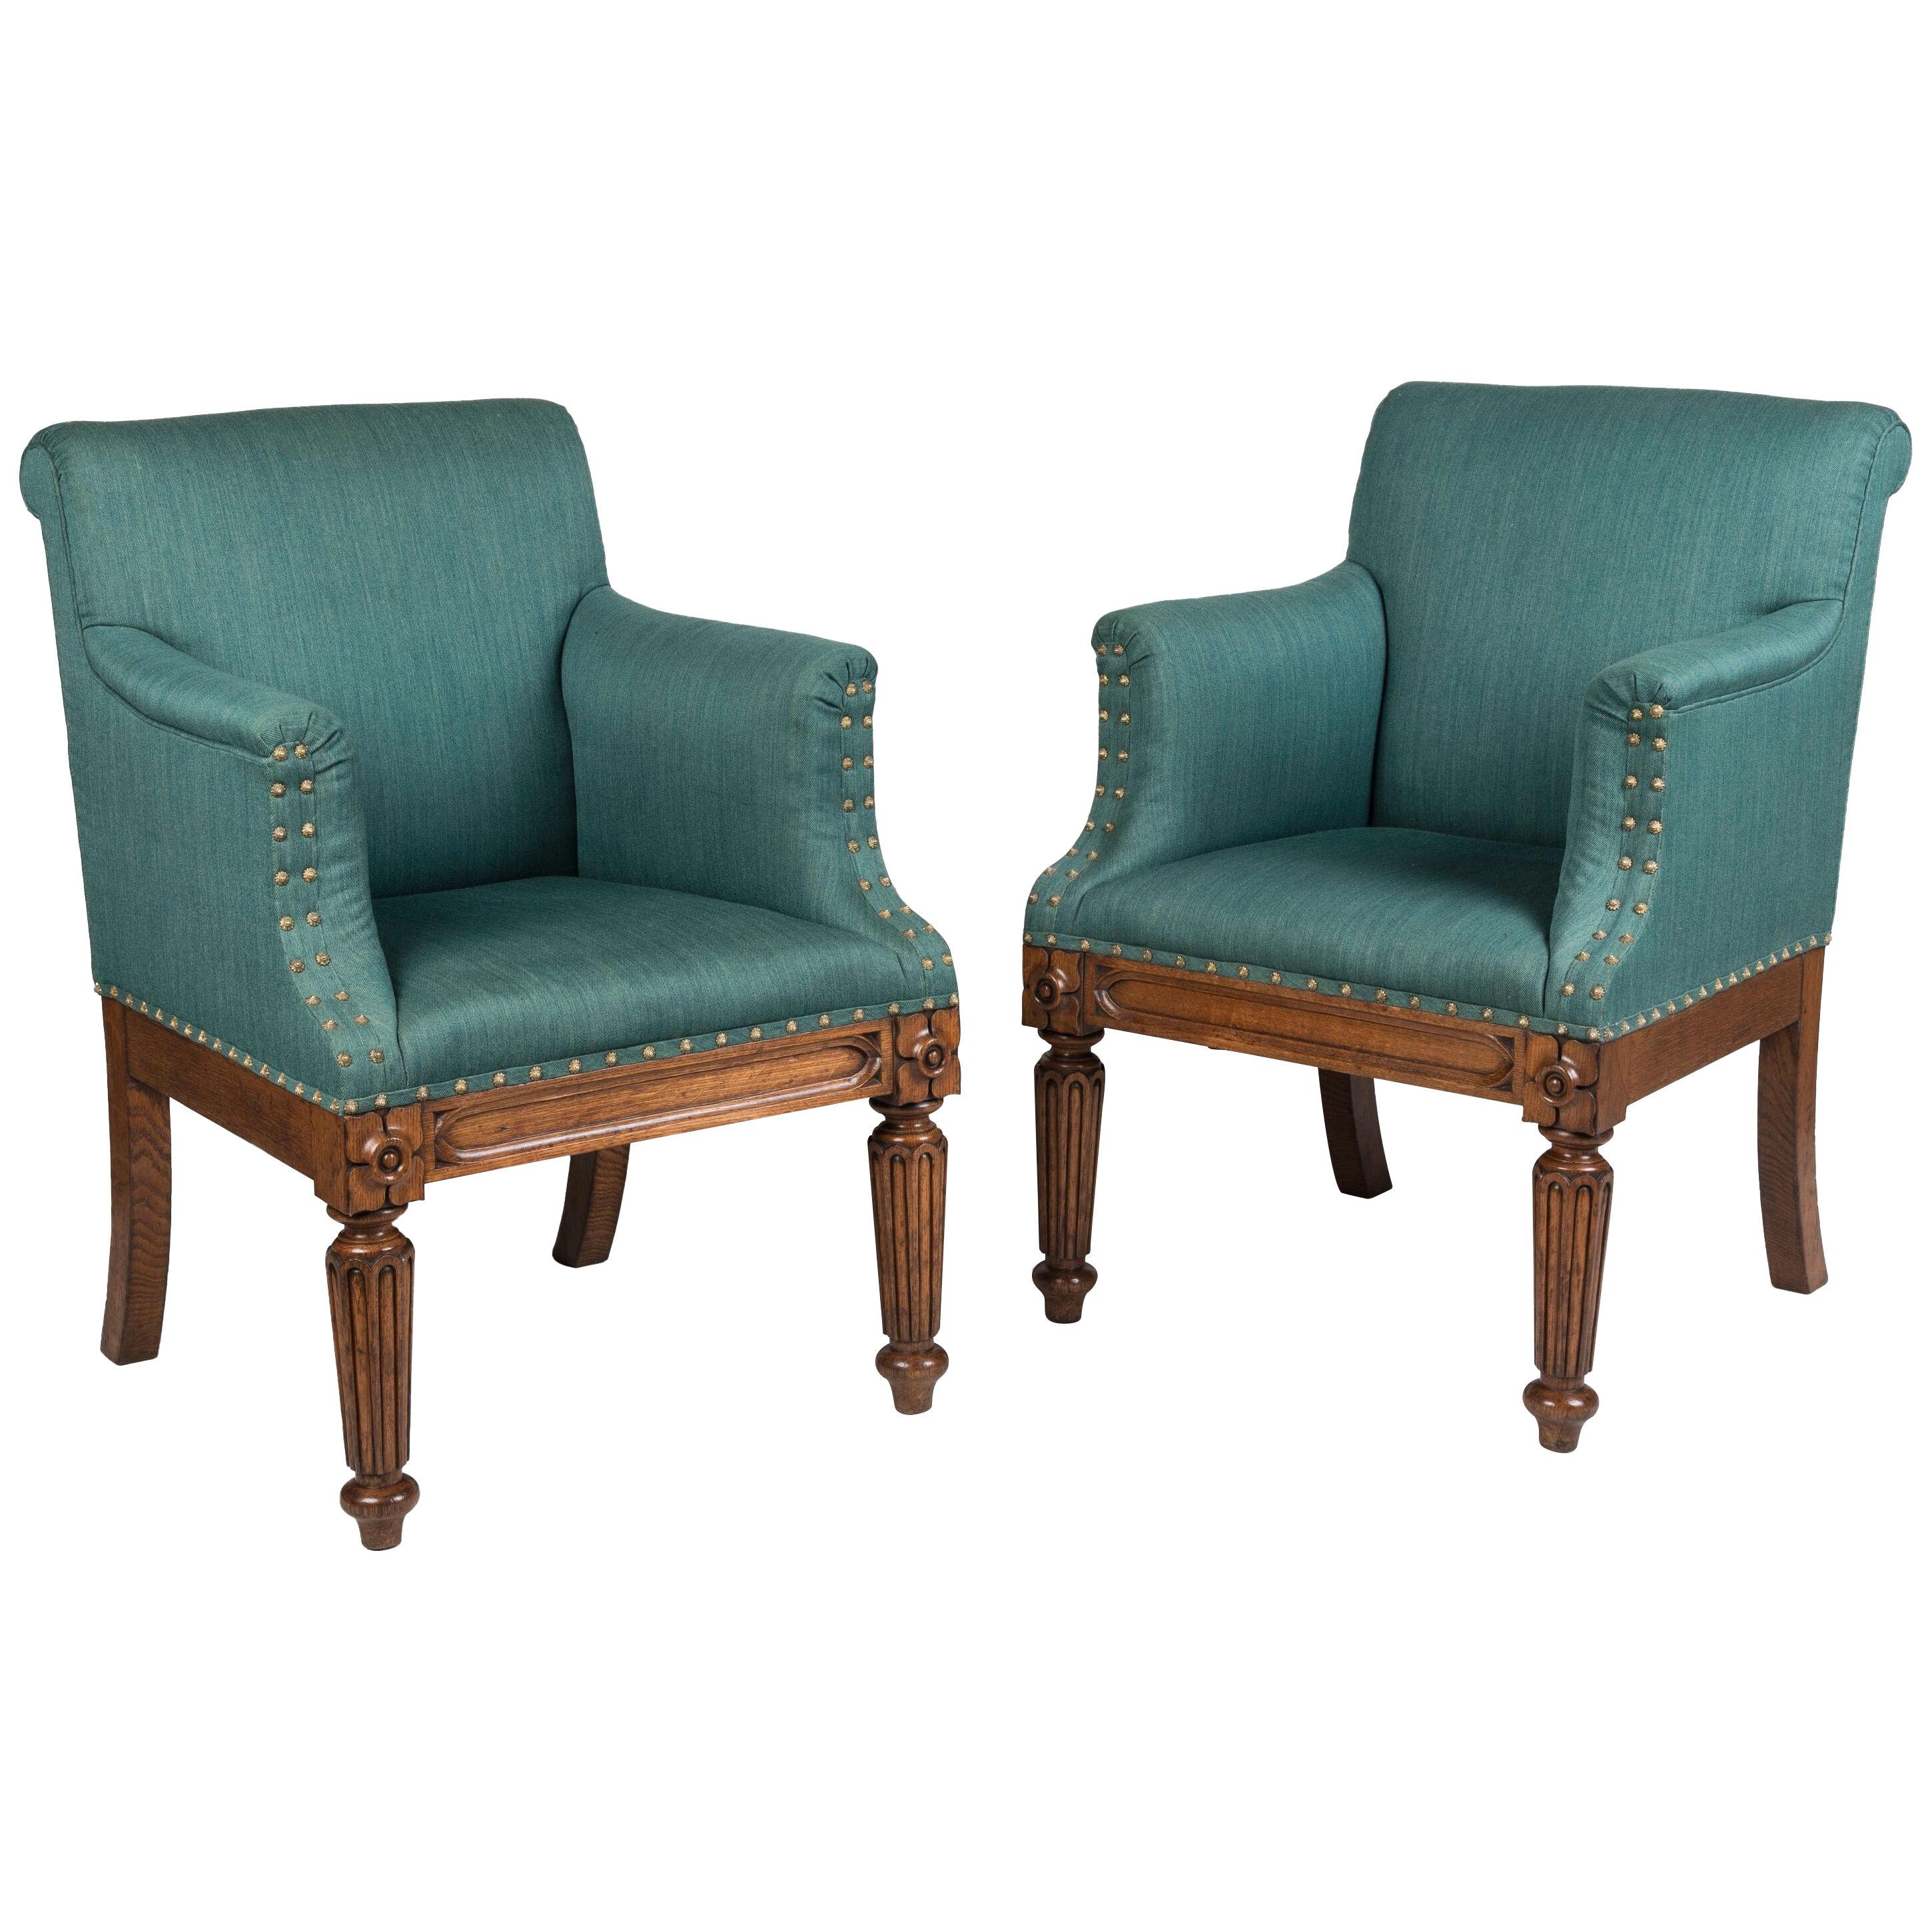 A Pair of George IV Period Armchairs